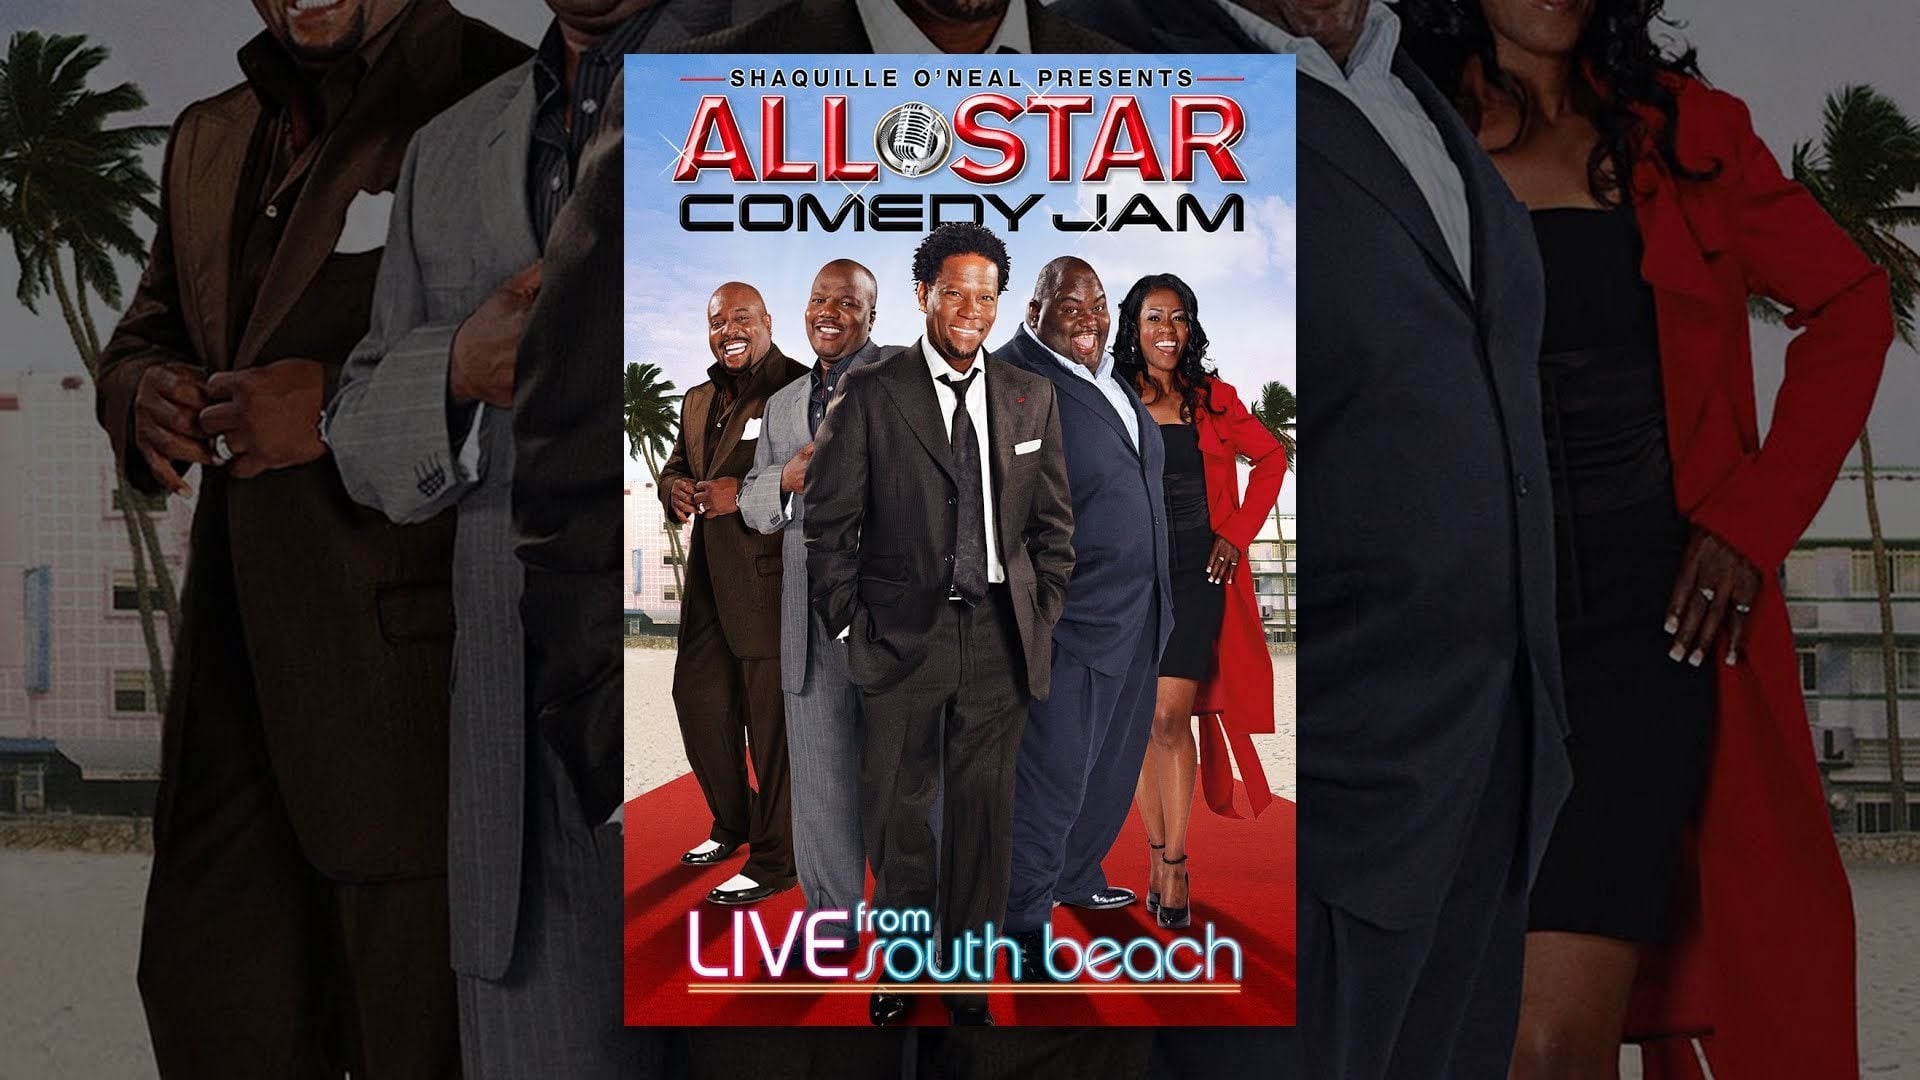 All Star Comedy Jam: Live from South Beach (2009)